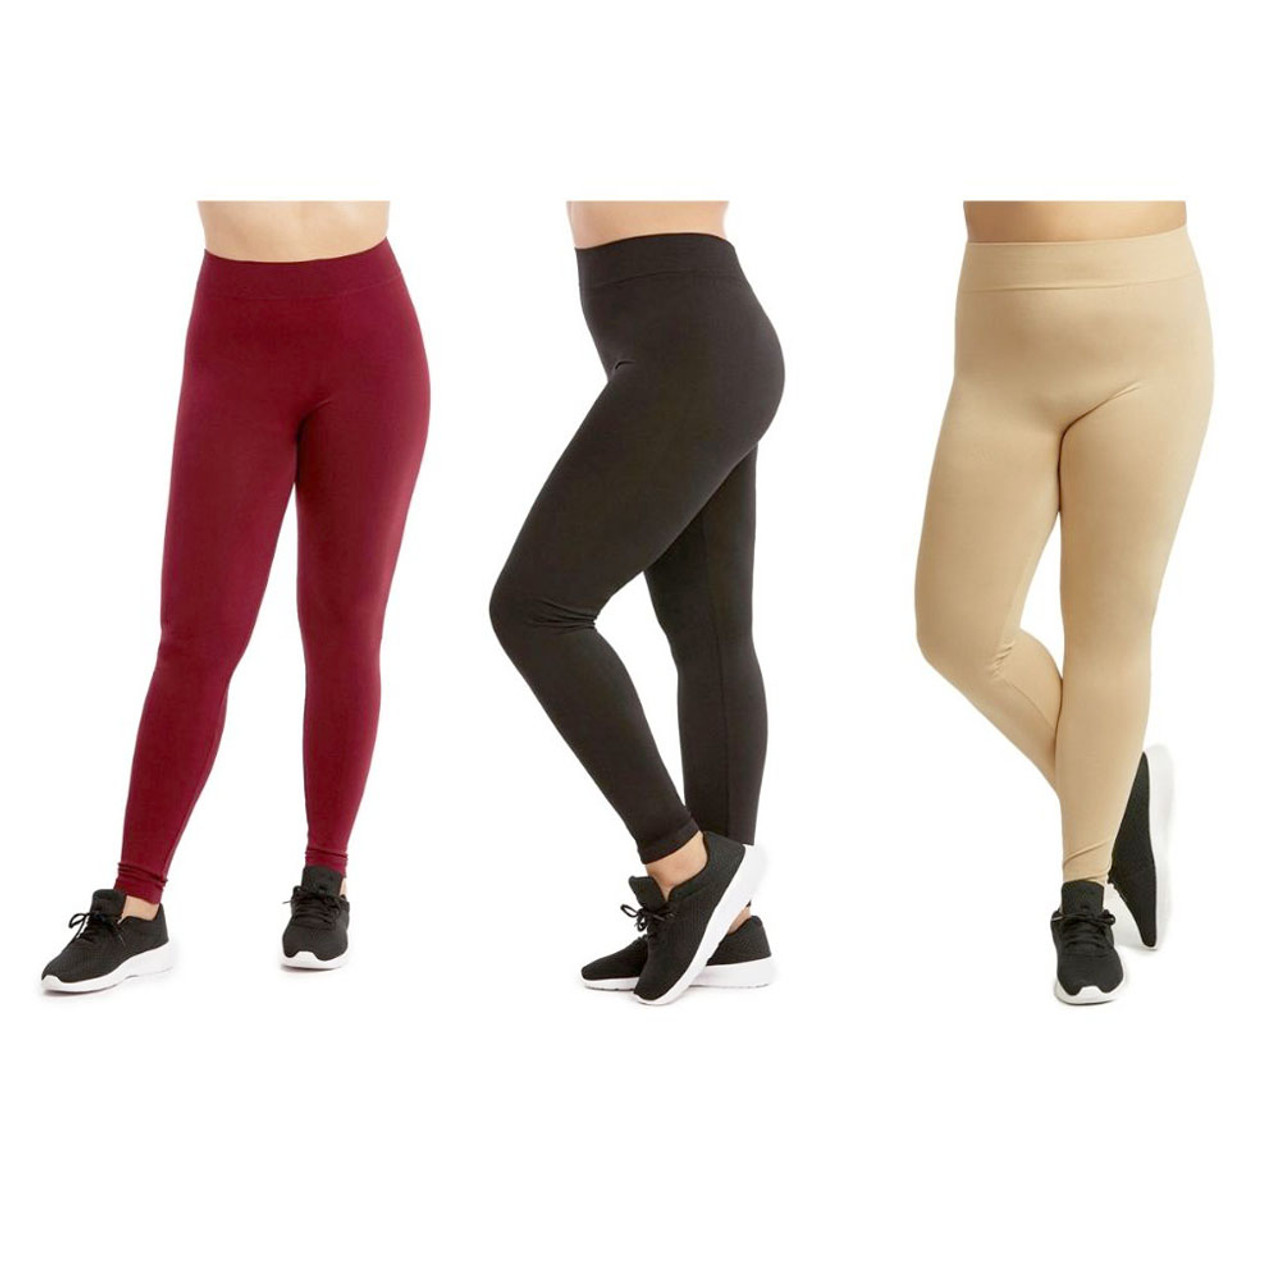 Plus Size Women's Casual Ultra-Soft Workout Leggings (3-Pack